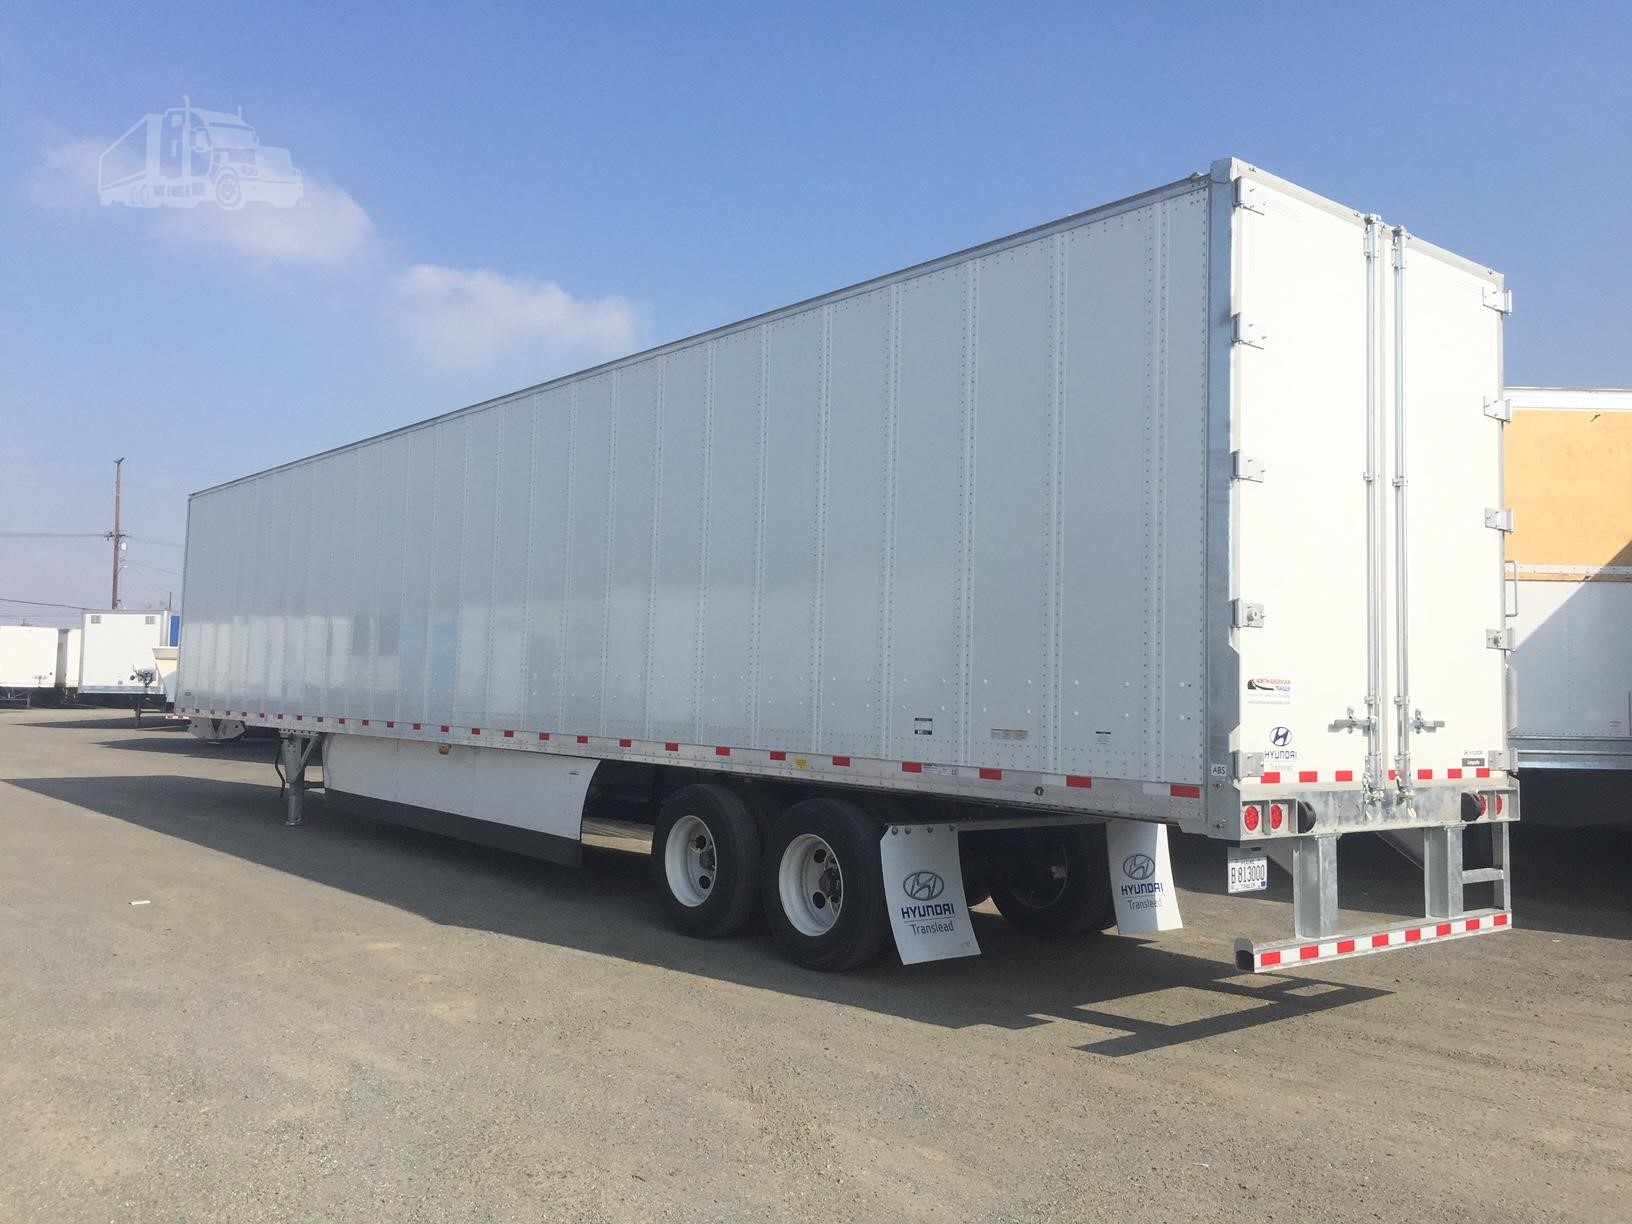 Dry Van Trailers For Sale - 630 Listings | TruckPaper.com - Page 11 of 26